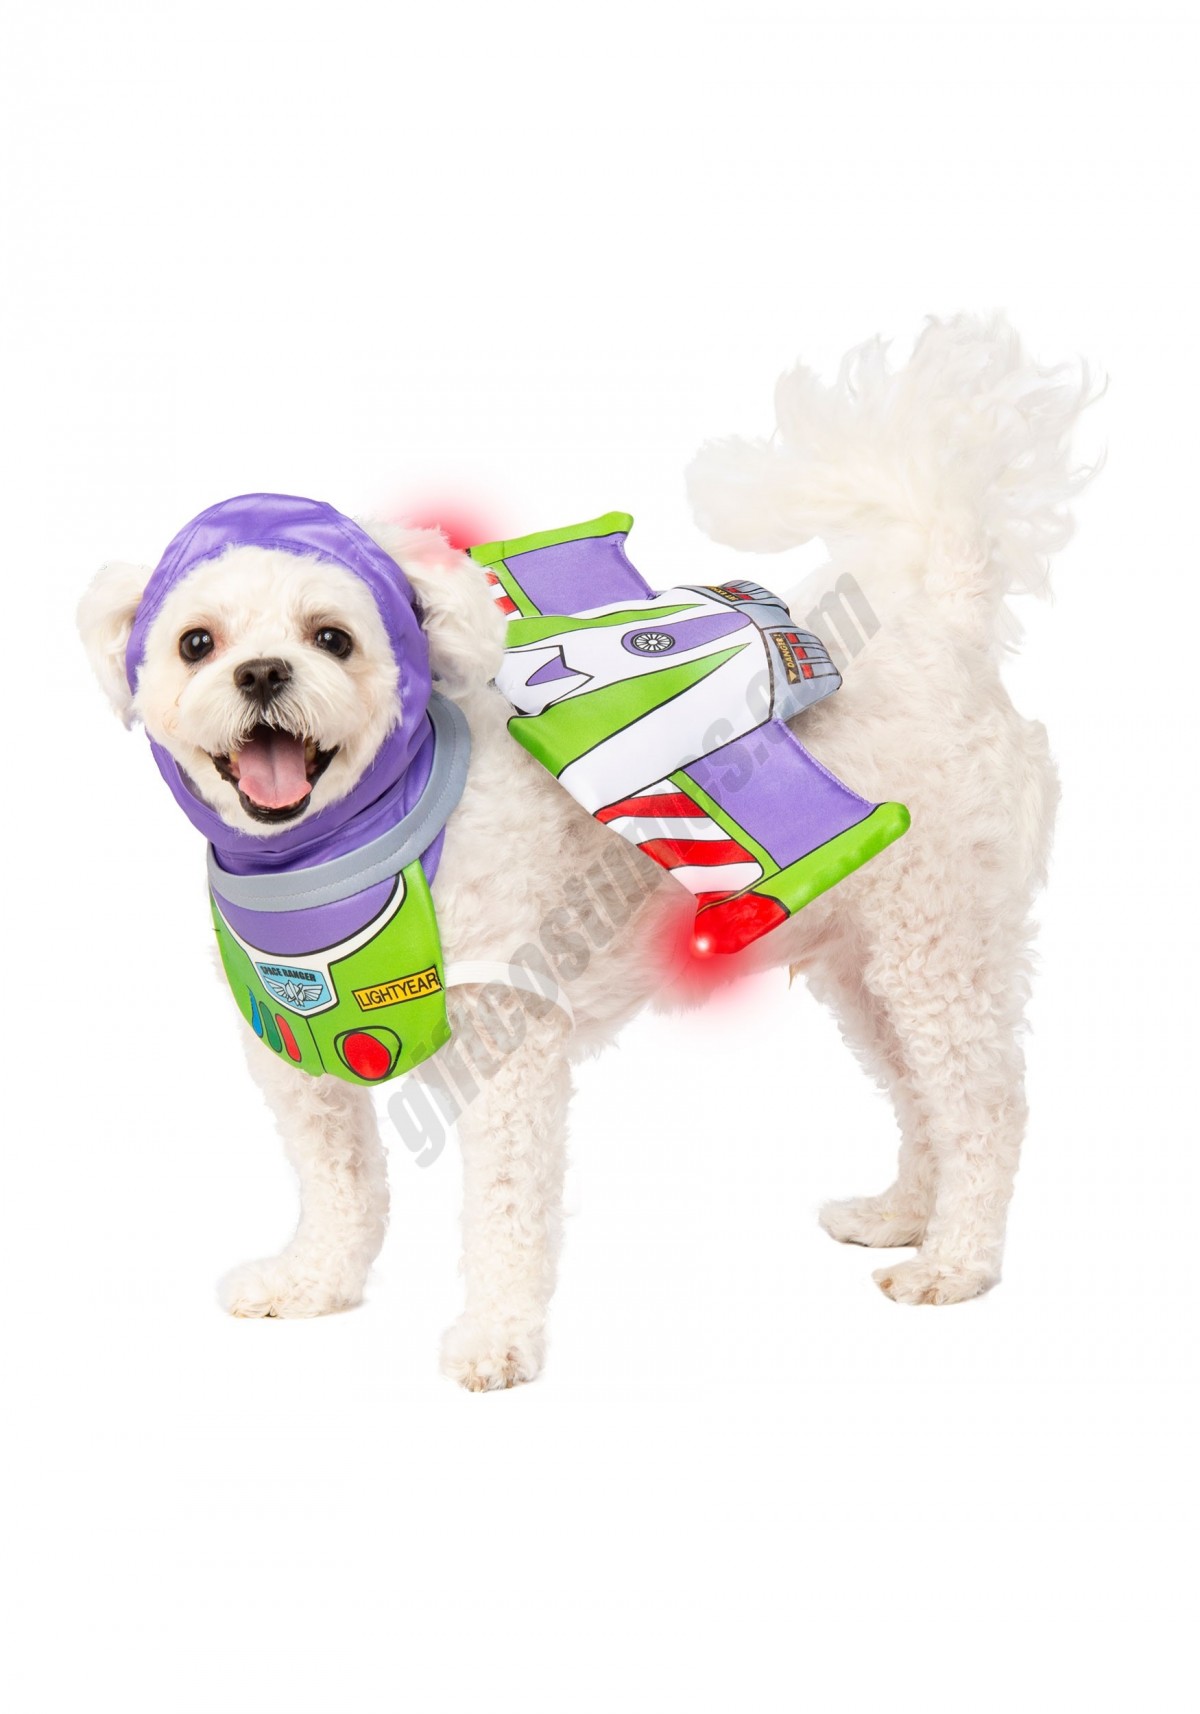 Toy Story Buzz Lightyear Costume for Dog Promotions - -0